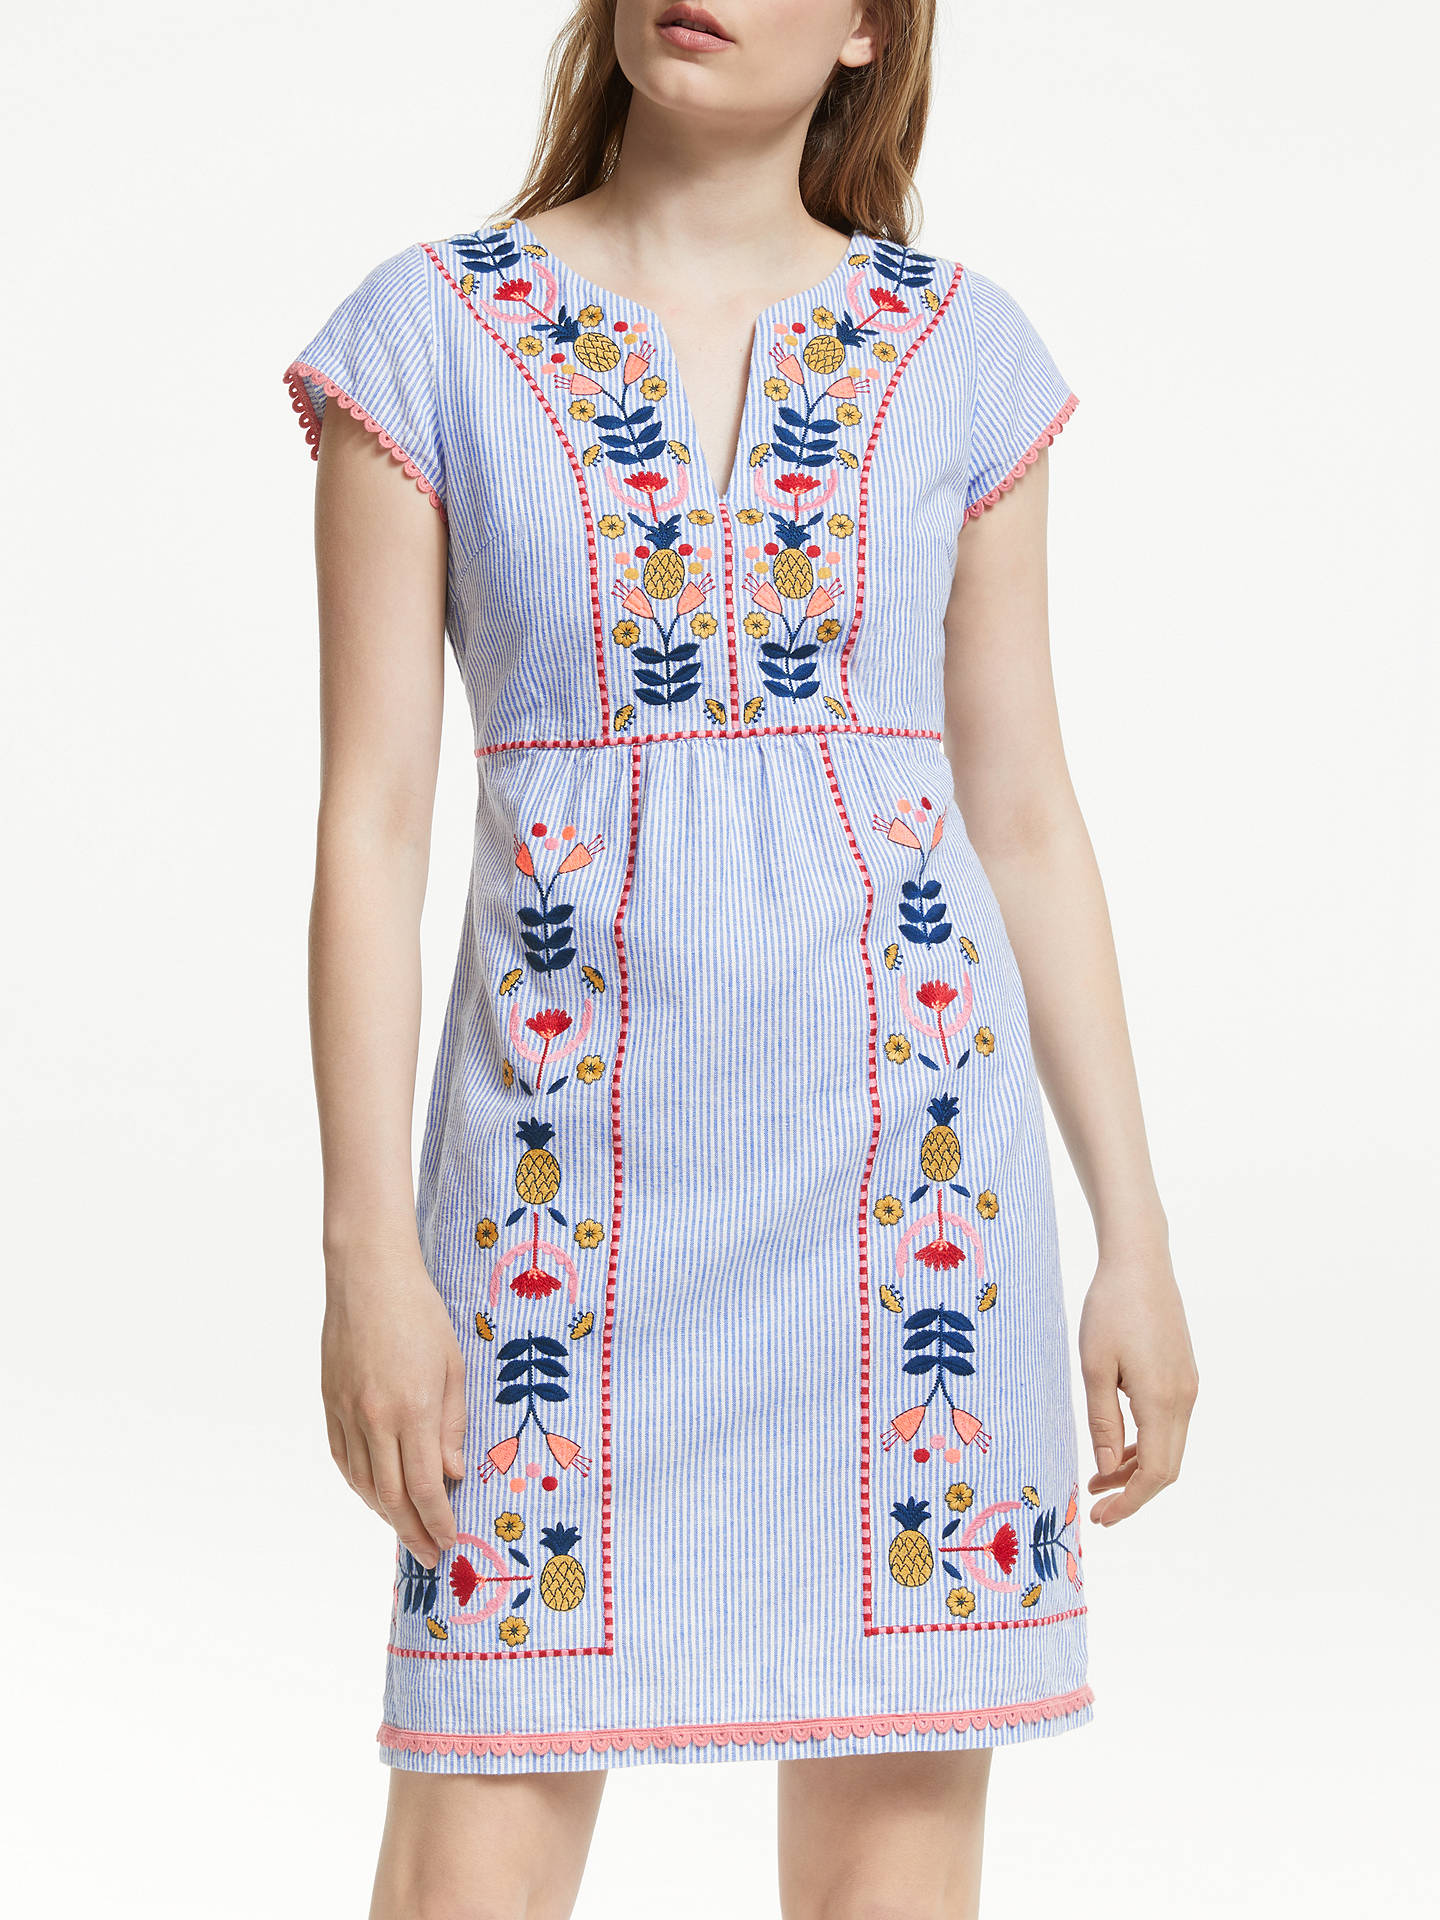 Boden Bea Linen Embroidered Dress Blue Multi At John Lewis Partners